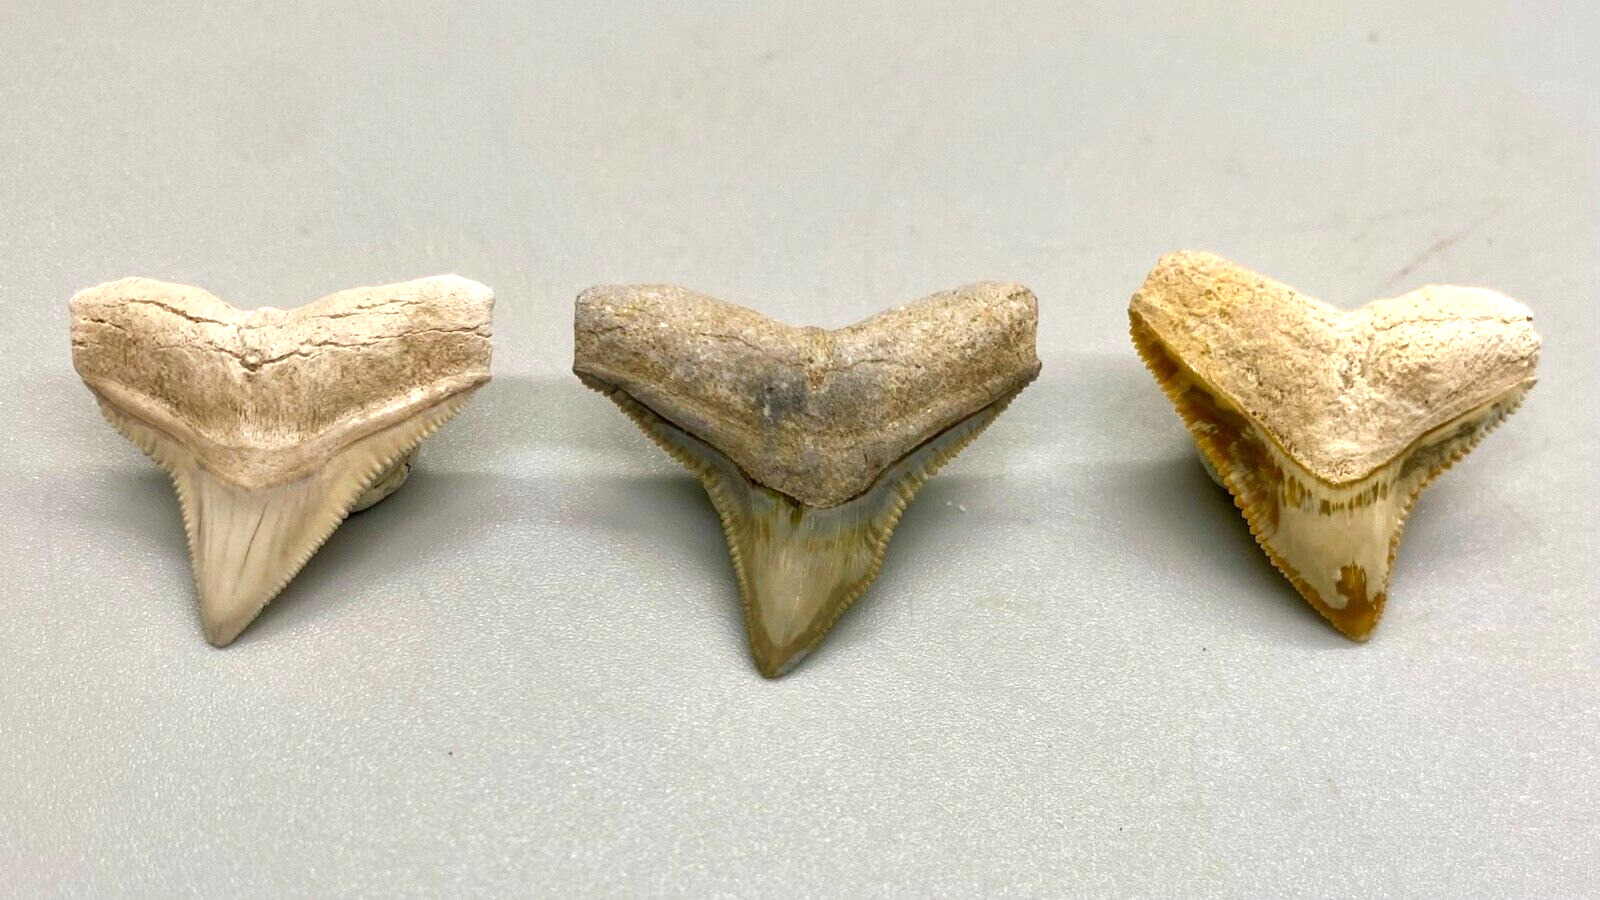 Group of 3 Gorgeous and COLORFUL Fossil BULL SHARK Teeth - Sarasota, FL